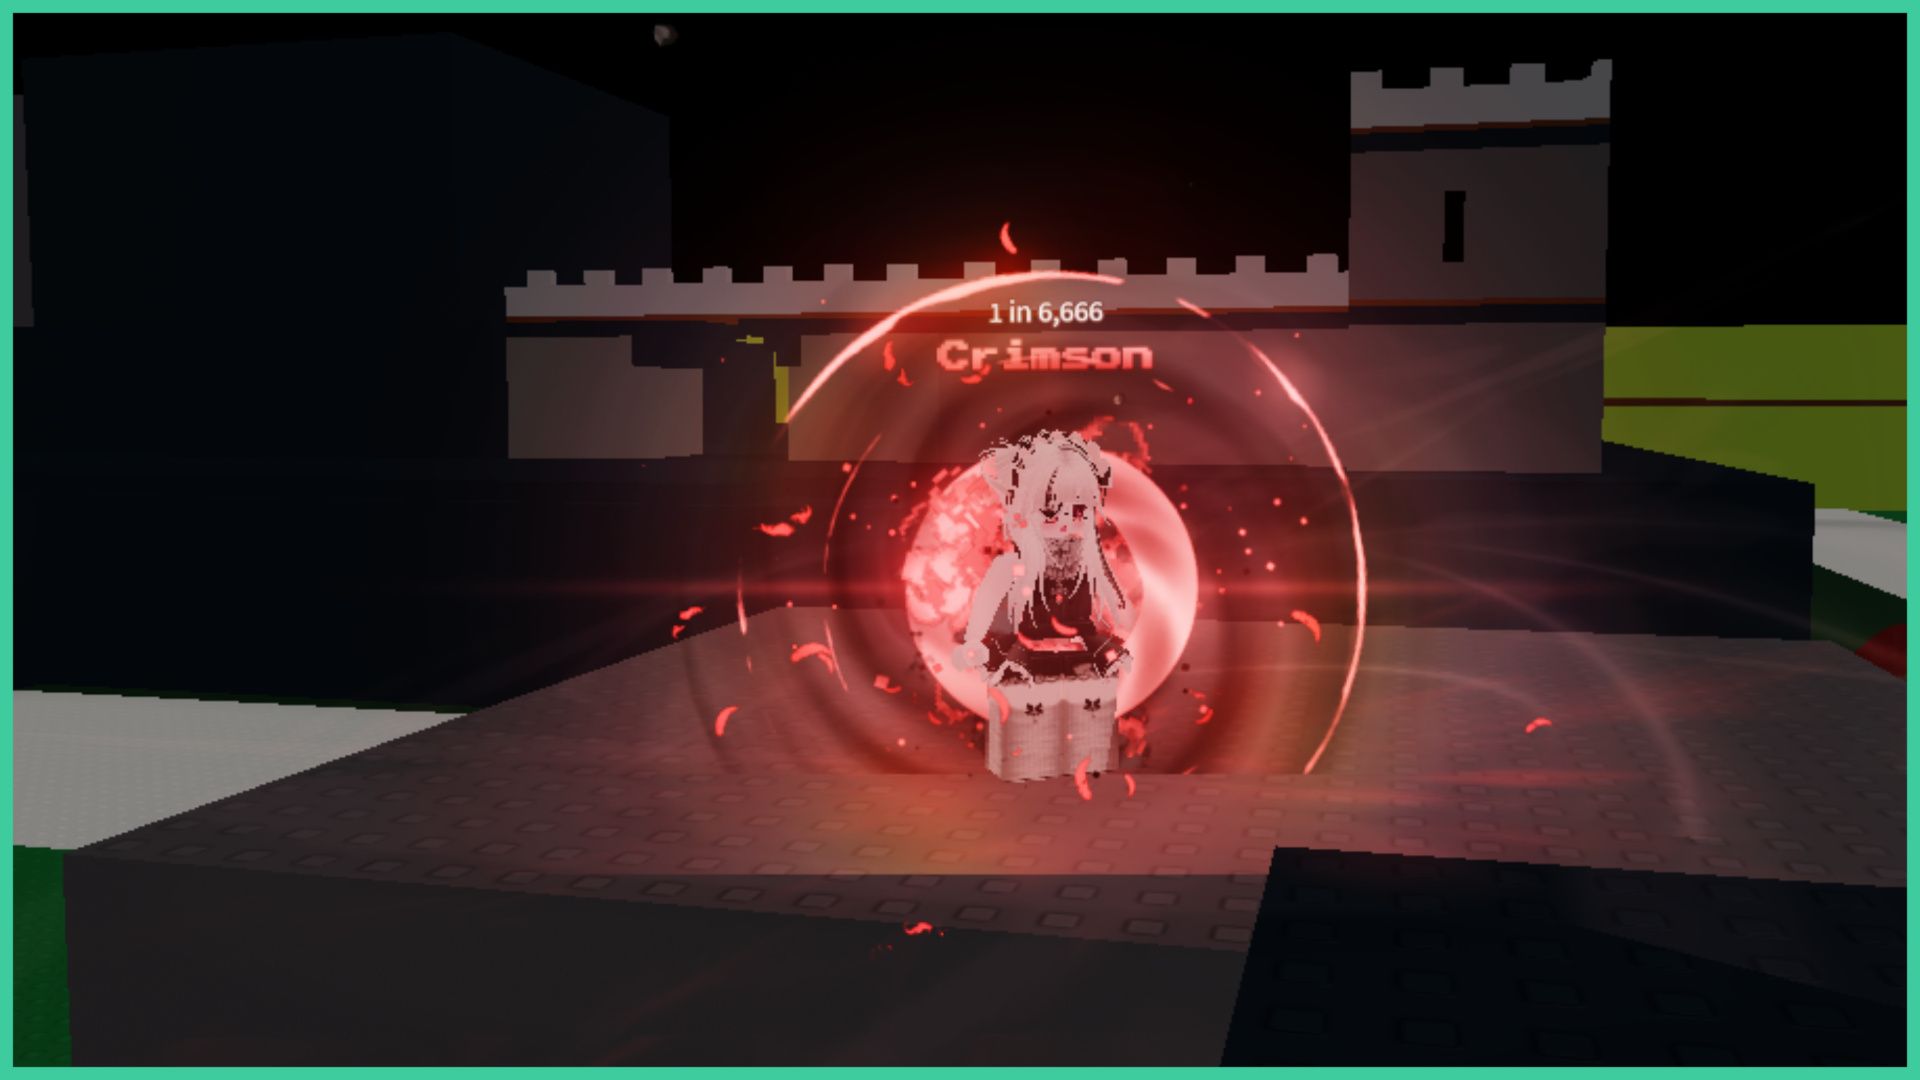 feature image for our hades rng codes guide, the image features a screenshot from the game of a player with the crimson aura equipped as they stand on a grey platform with a castle behind them, the crimson aura has pixelated fire and a glowing red circle around the avatar with the words '1 in 6,666 crimson' above